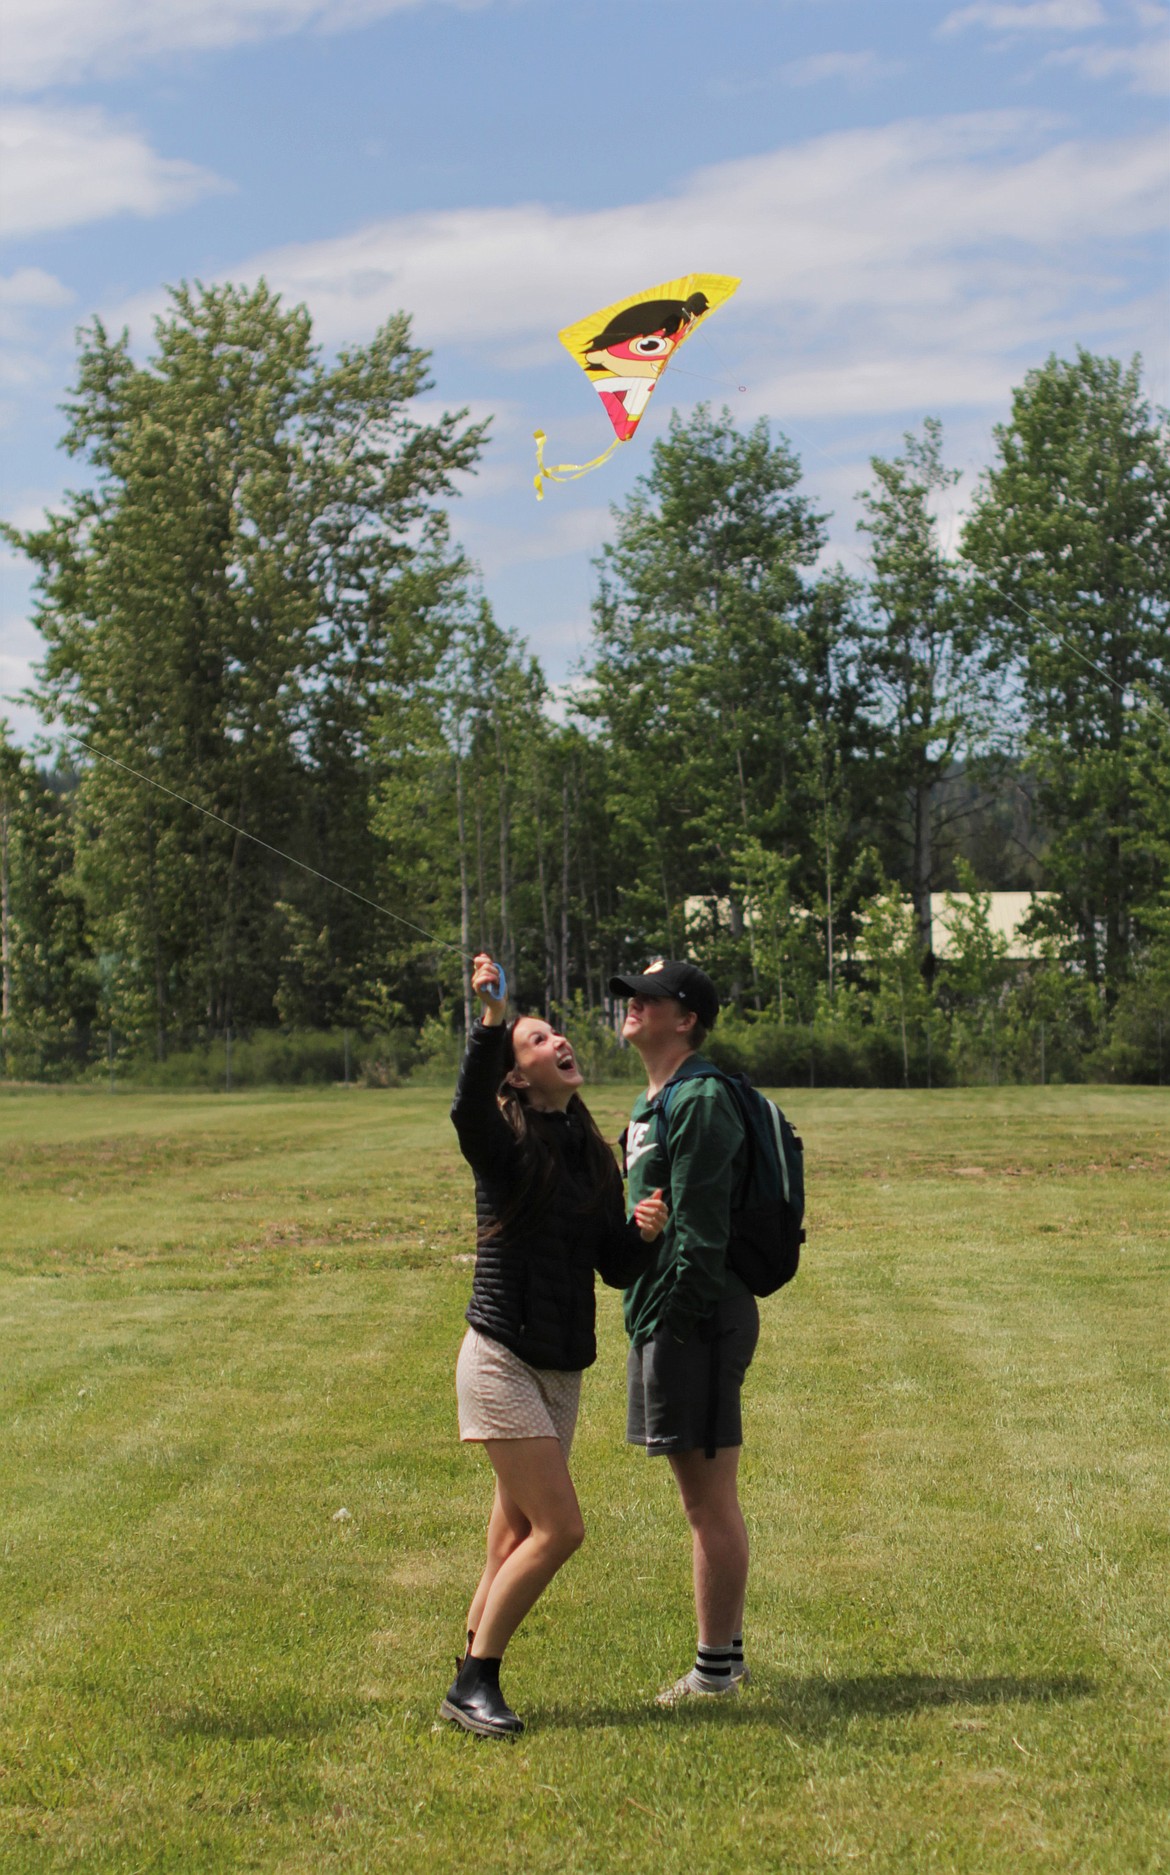 Erin Eddy (left) flies a kite as Lukas Genay-Wolf looks on Friday afternoon.